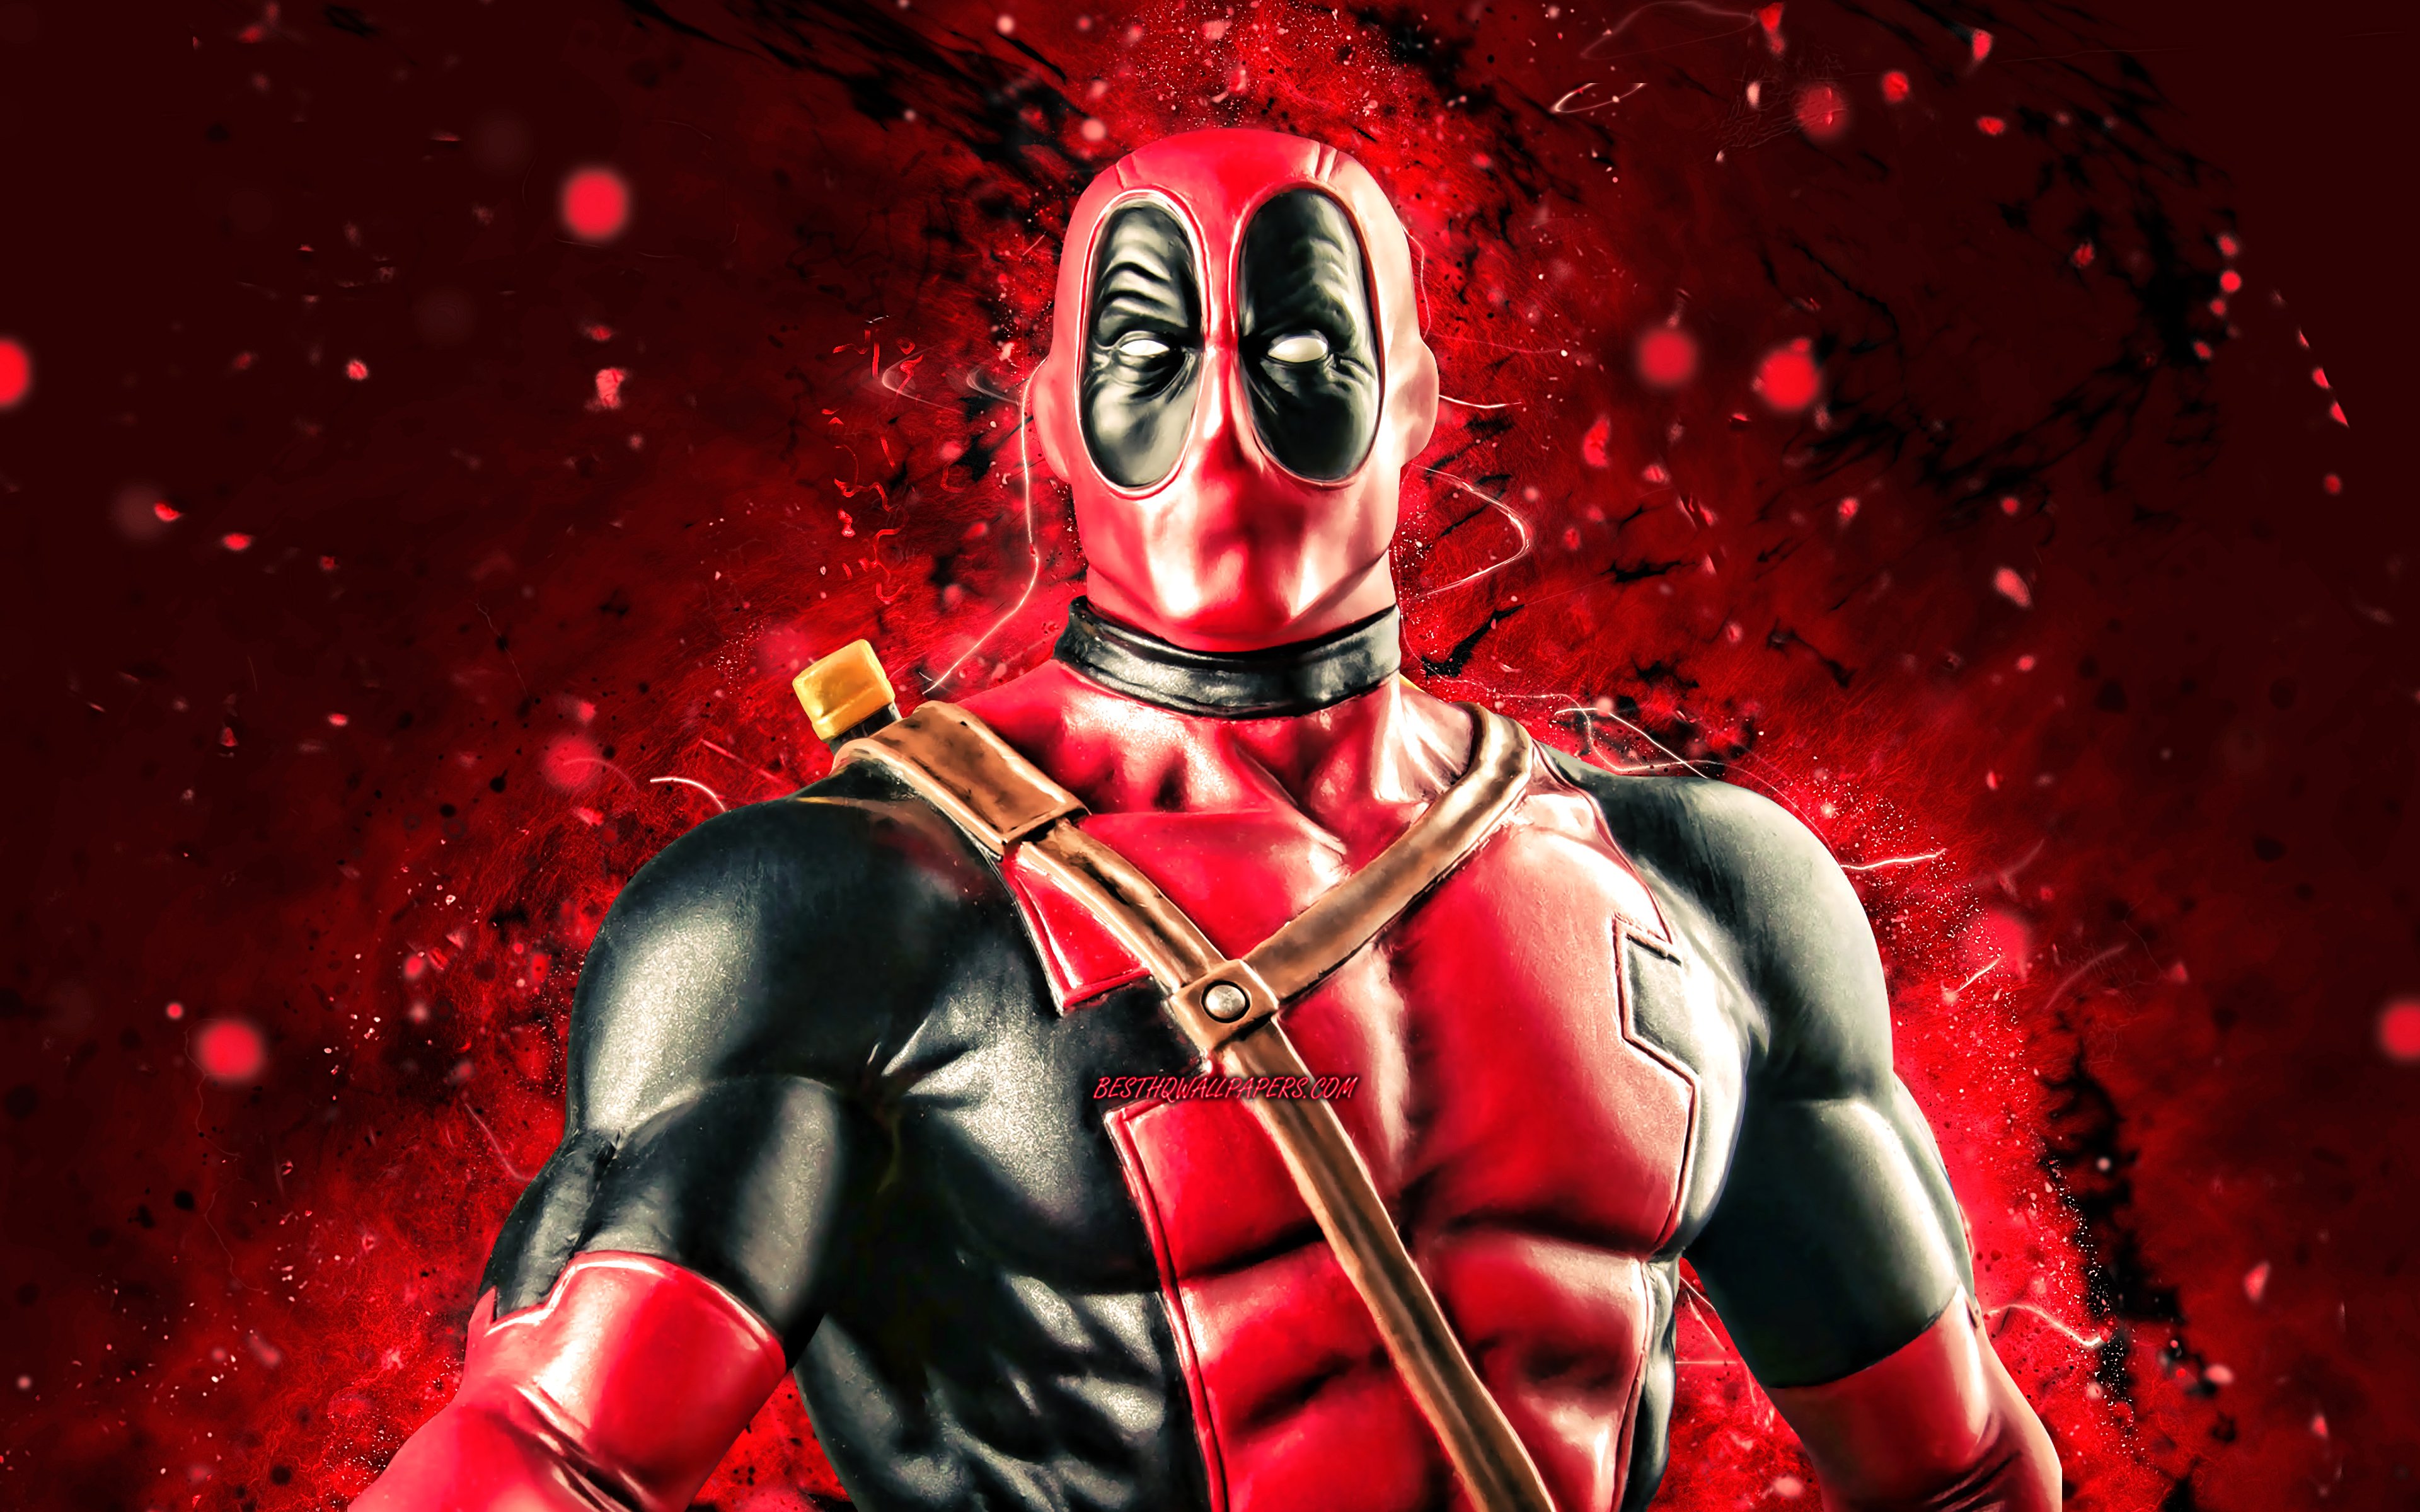 Download wallpapers Deadpool, 4k, red neon lights, superheroes, Marvel  Comics, Deadpool 4K, Cartoon Deadpool for desktop with resolution  3840x2400. High Quality HD pictures wallpapers